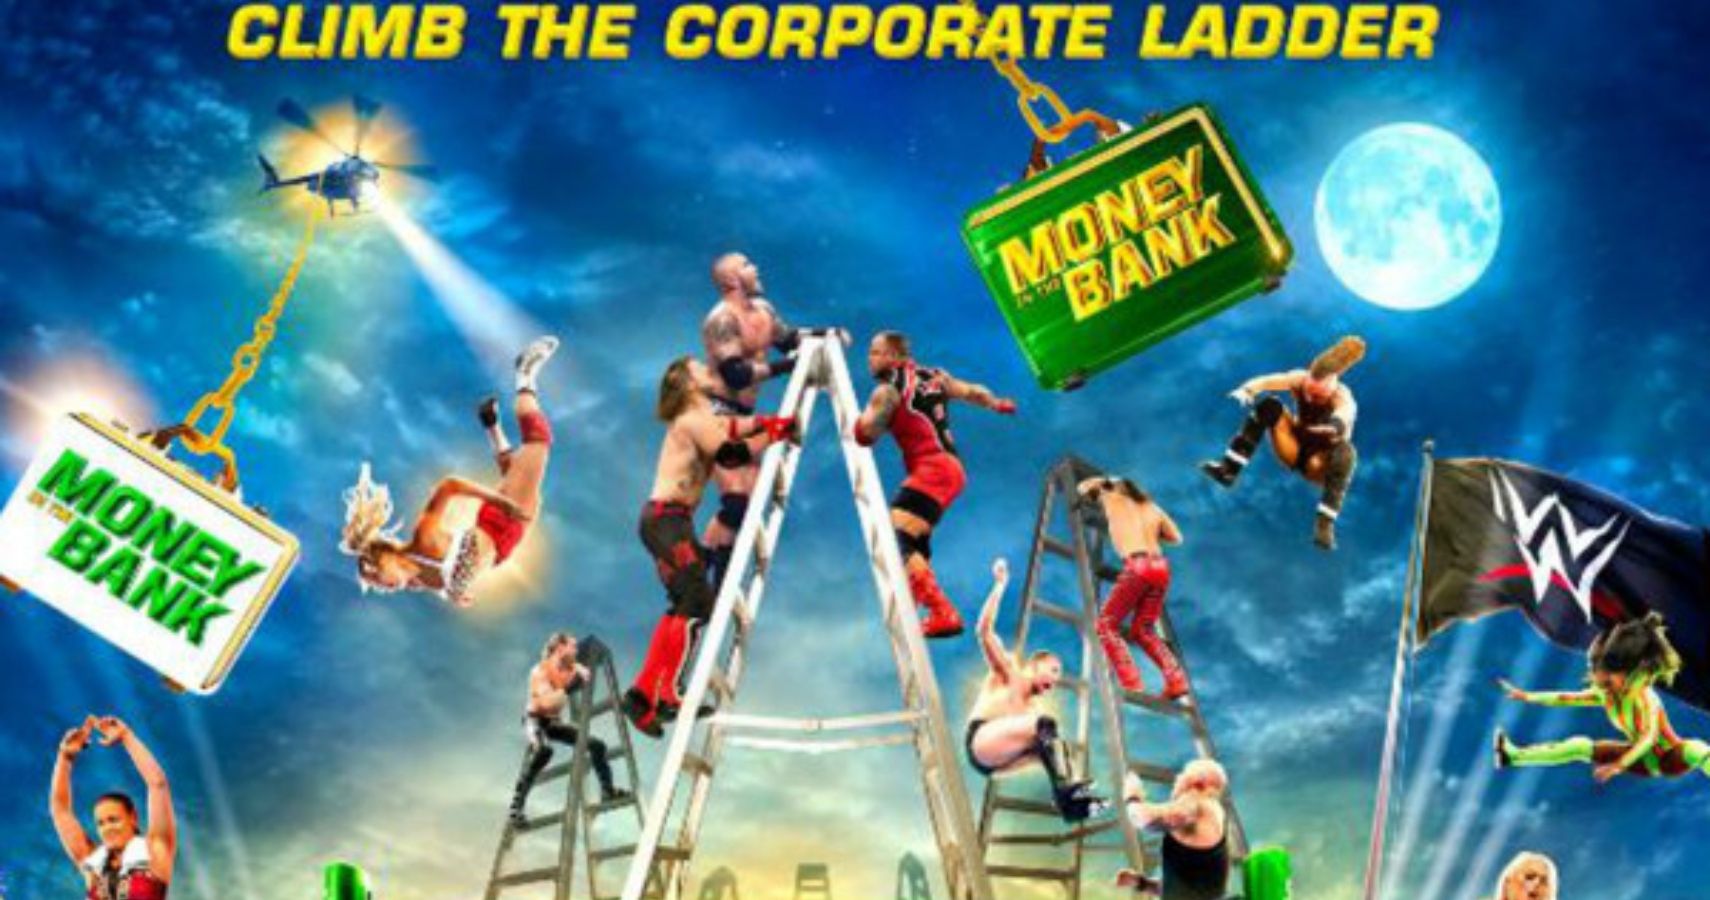 Money In The Bank Ladder Match Could Have Booby Traps